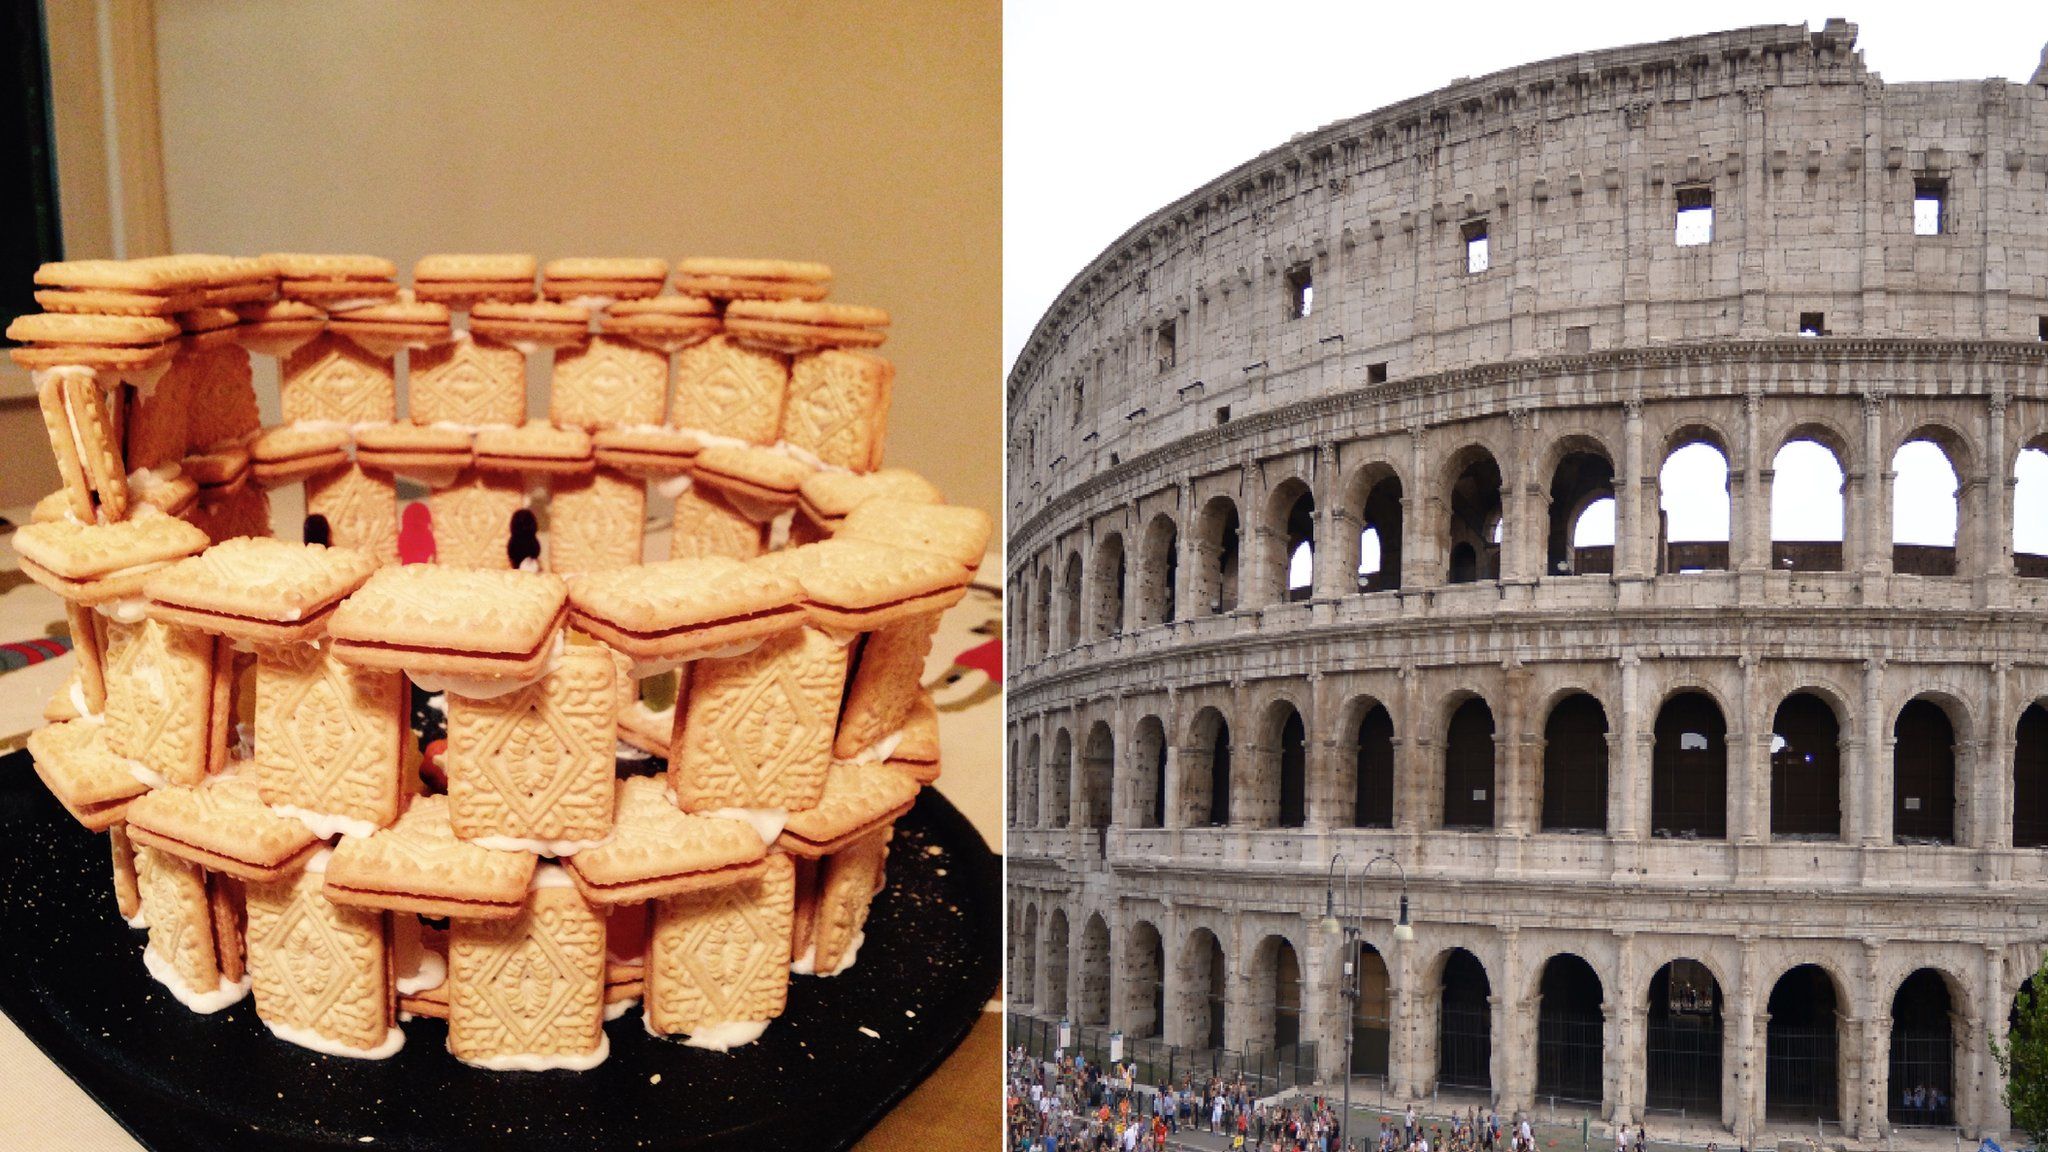 colosseum and biscuit model